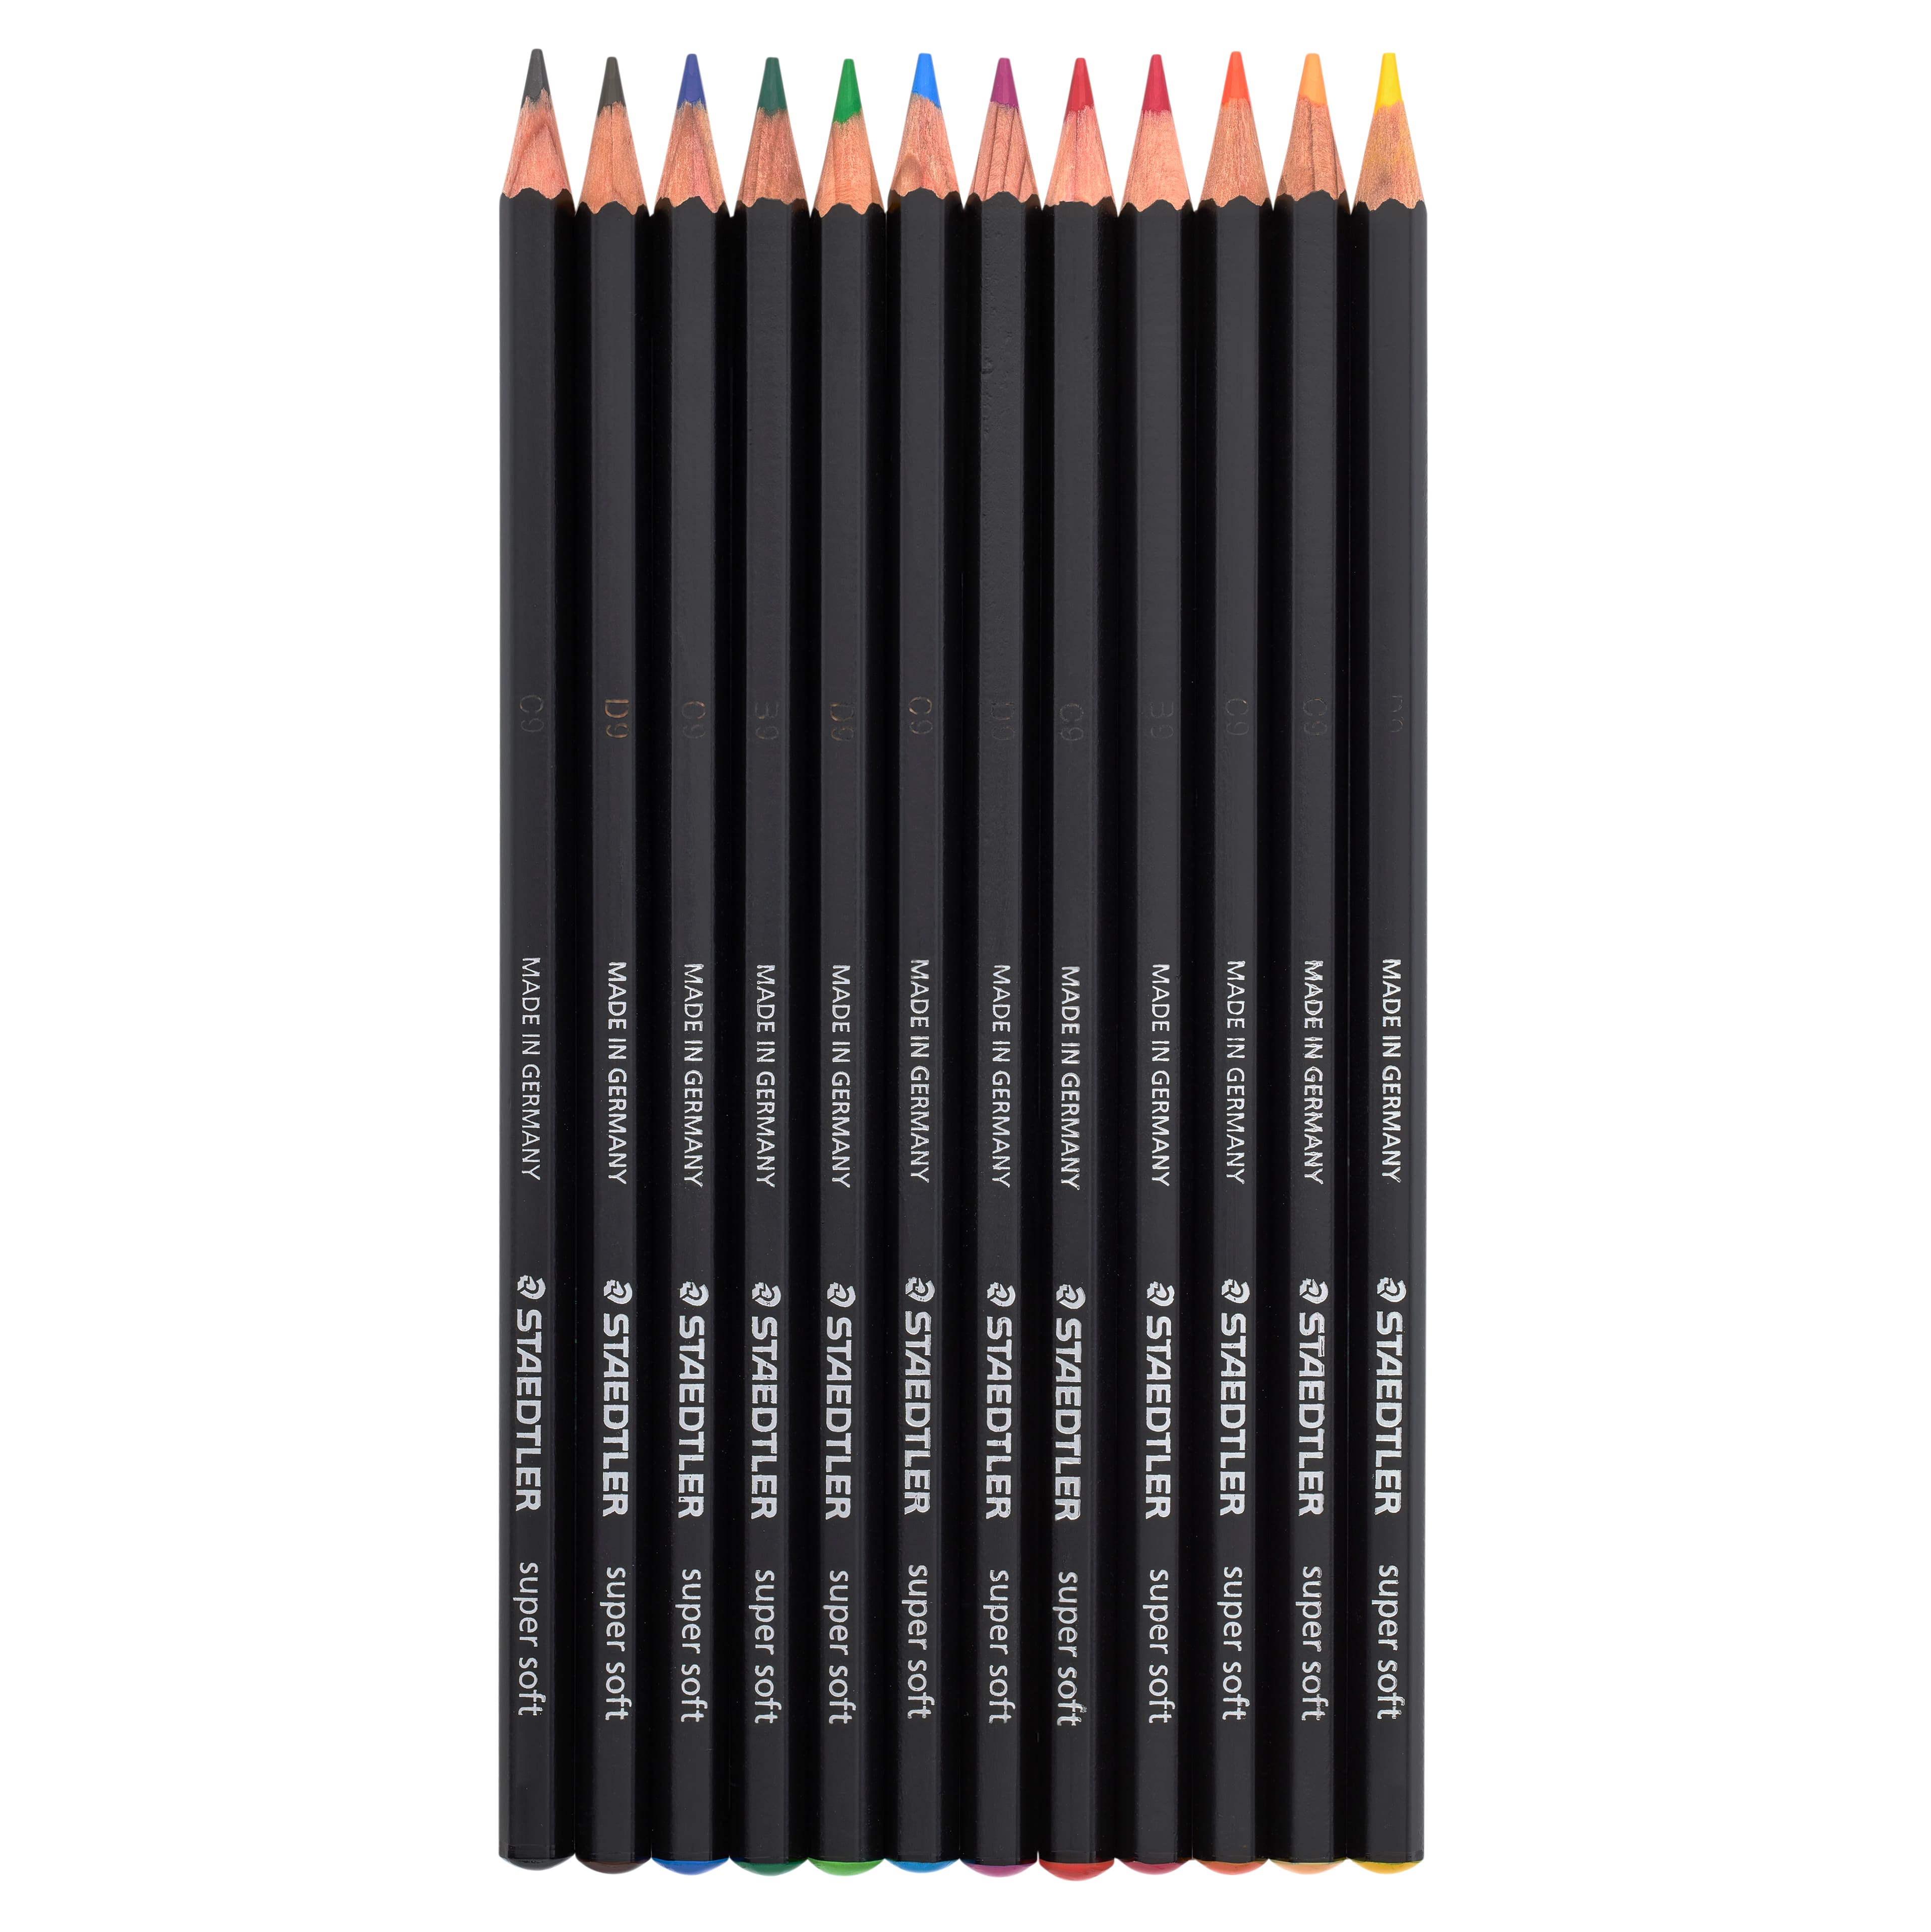 Staedtler super soft colored pencils for dark paper-are they